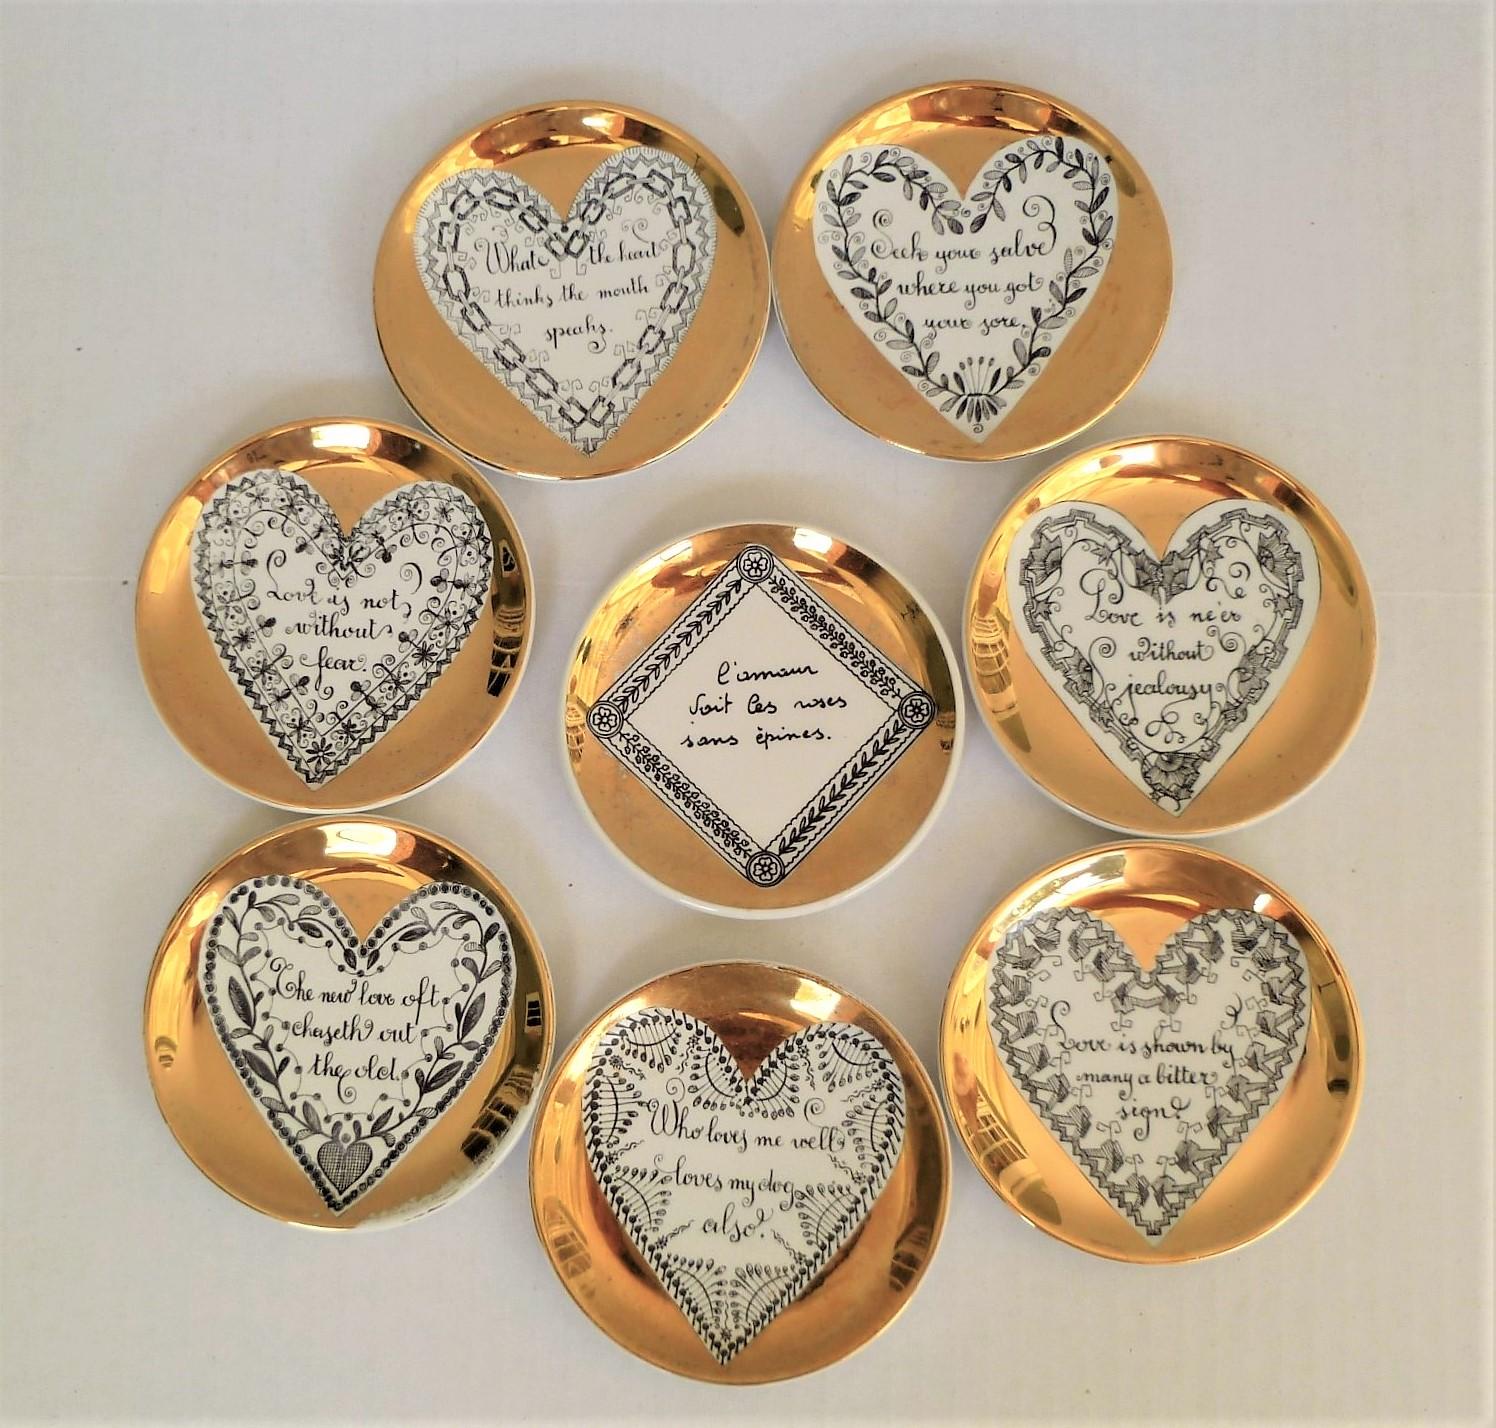 Perfect gift for the lover in all of us, 8 decorated love coasters, all by Piero Fornasetti and one by Bucciarelli, 1950s. Featuring English love themed messages in hearts the centers, they all have gilt backgrounds. The Buccirelli in a diamond in